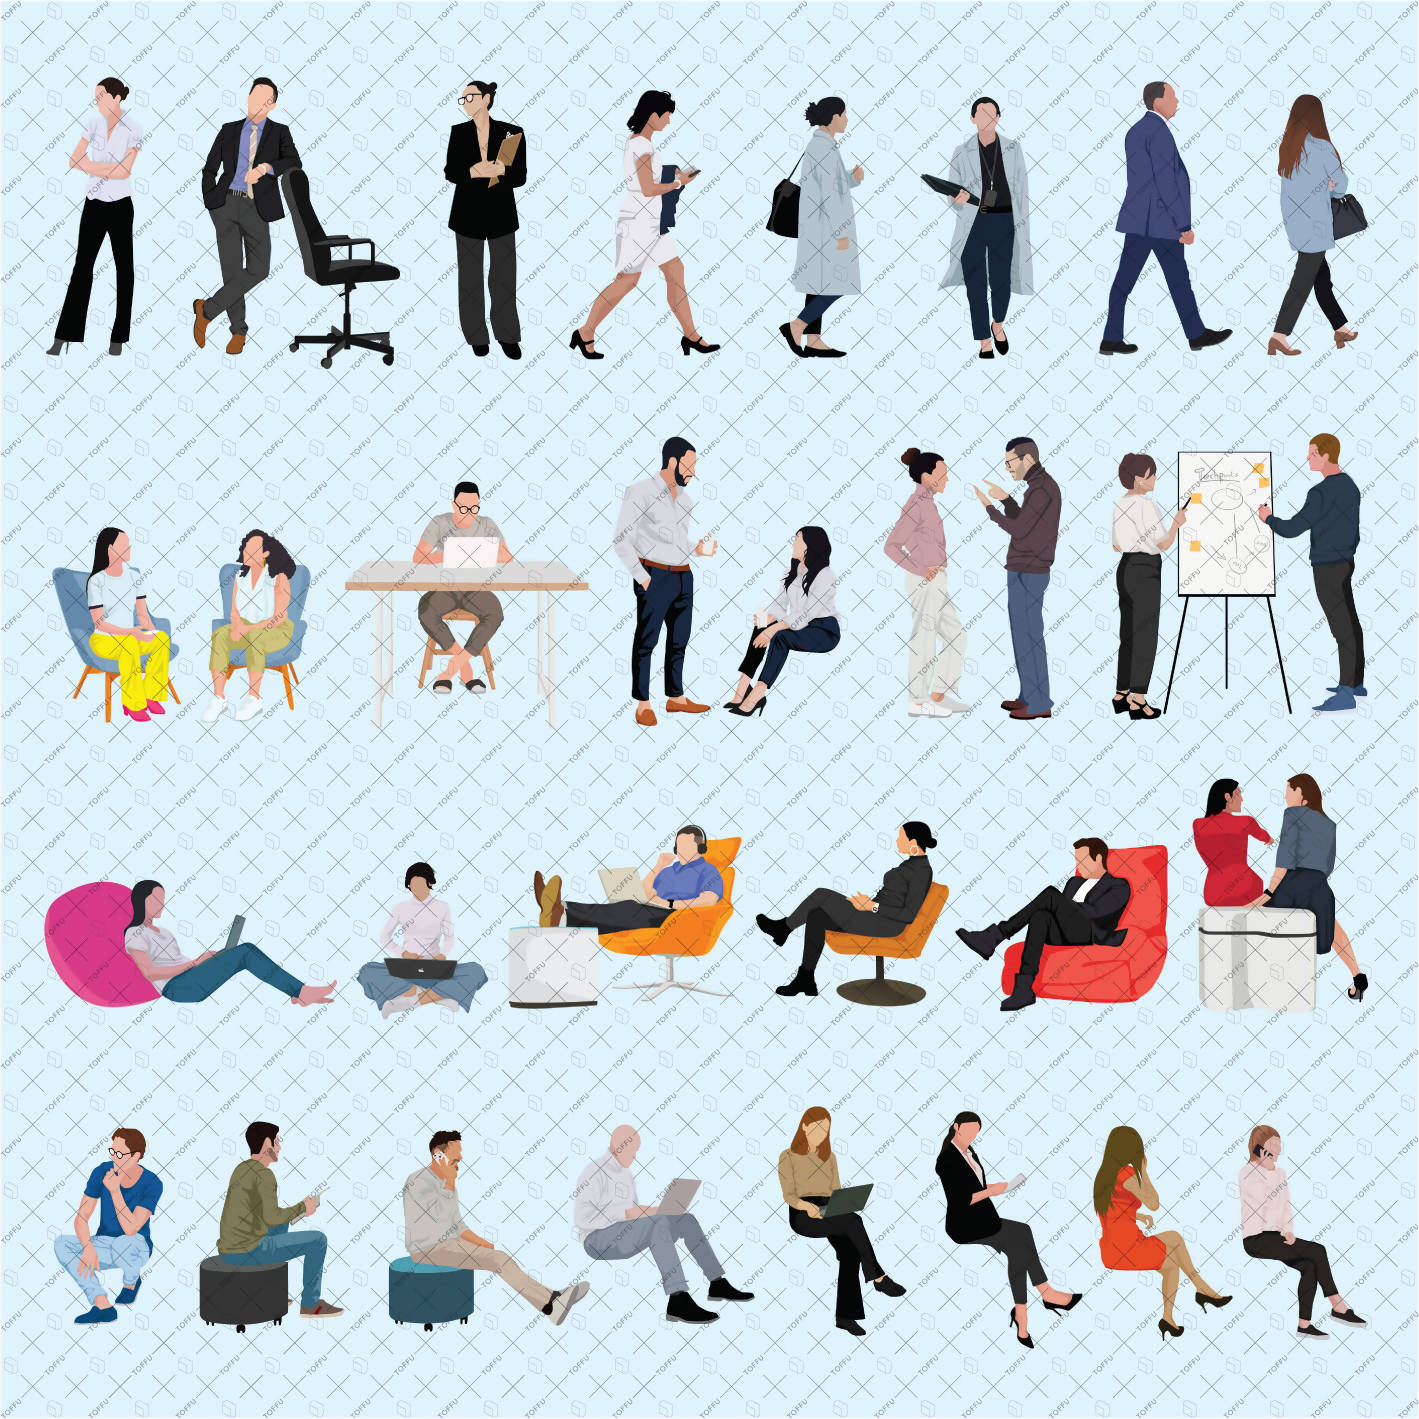 office people vector